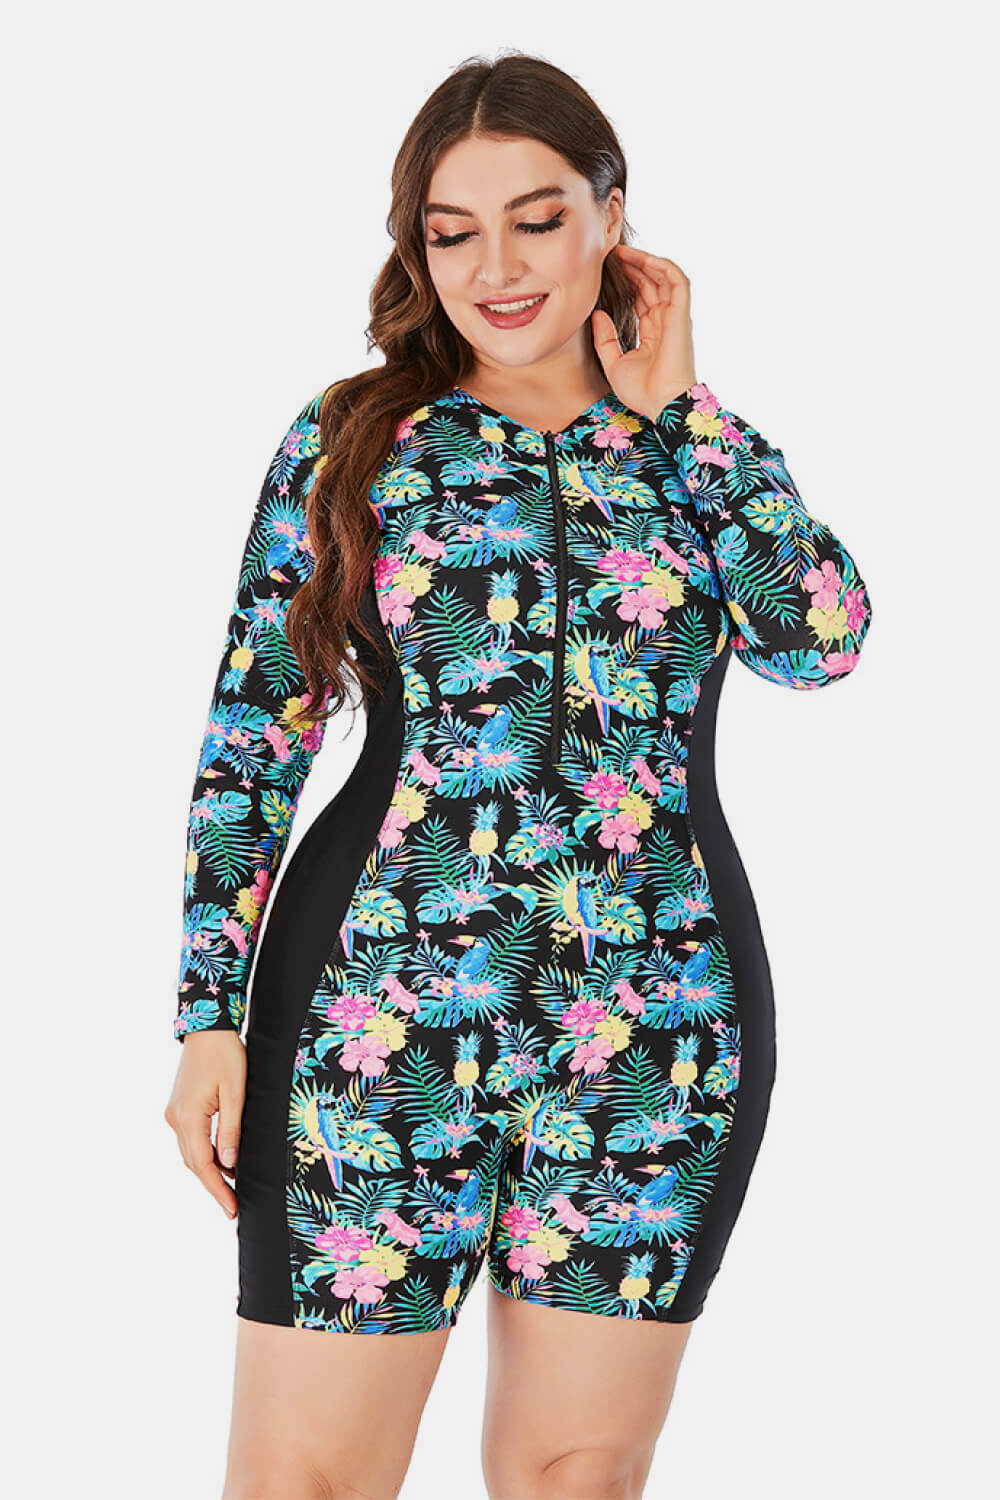 Plus Size Floral Zip Up Long Sleeve Short Wetsuit - Women’s Clothing & Accessories - Swimwear - 2 - 2024